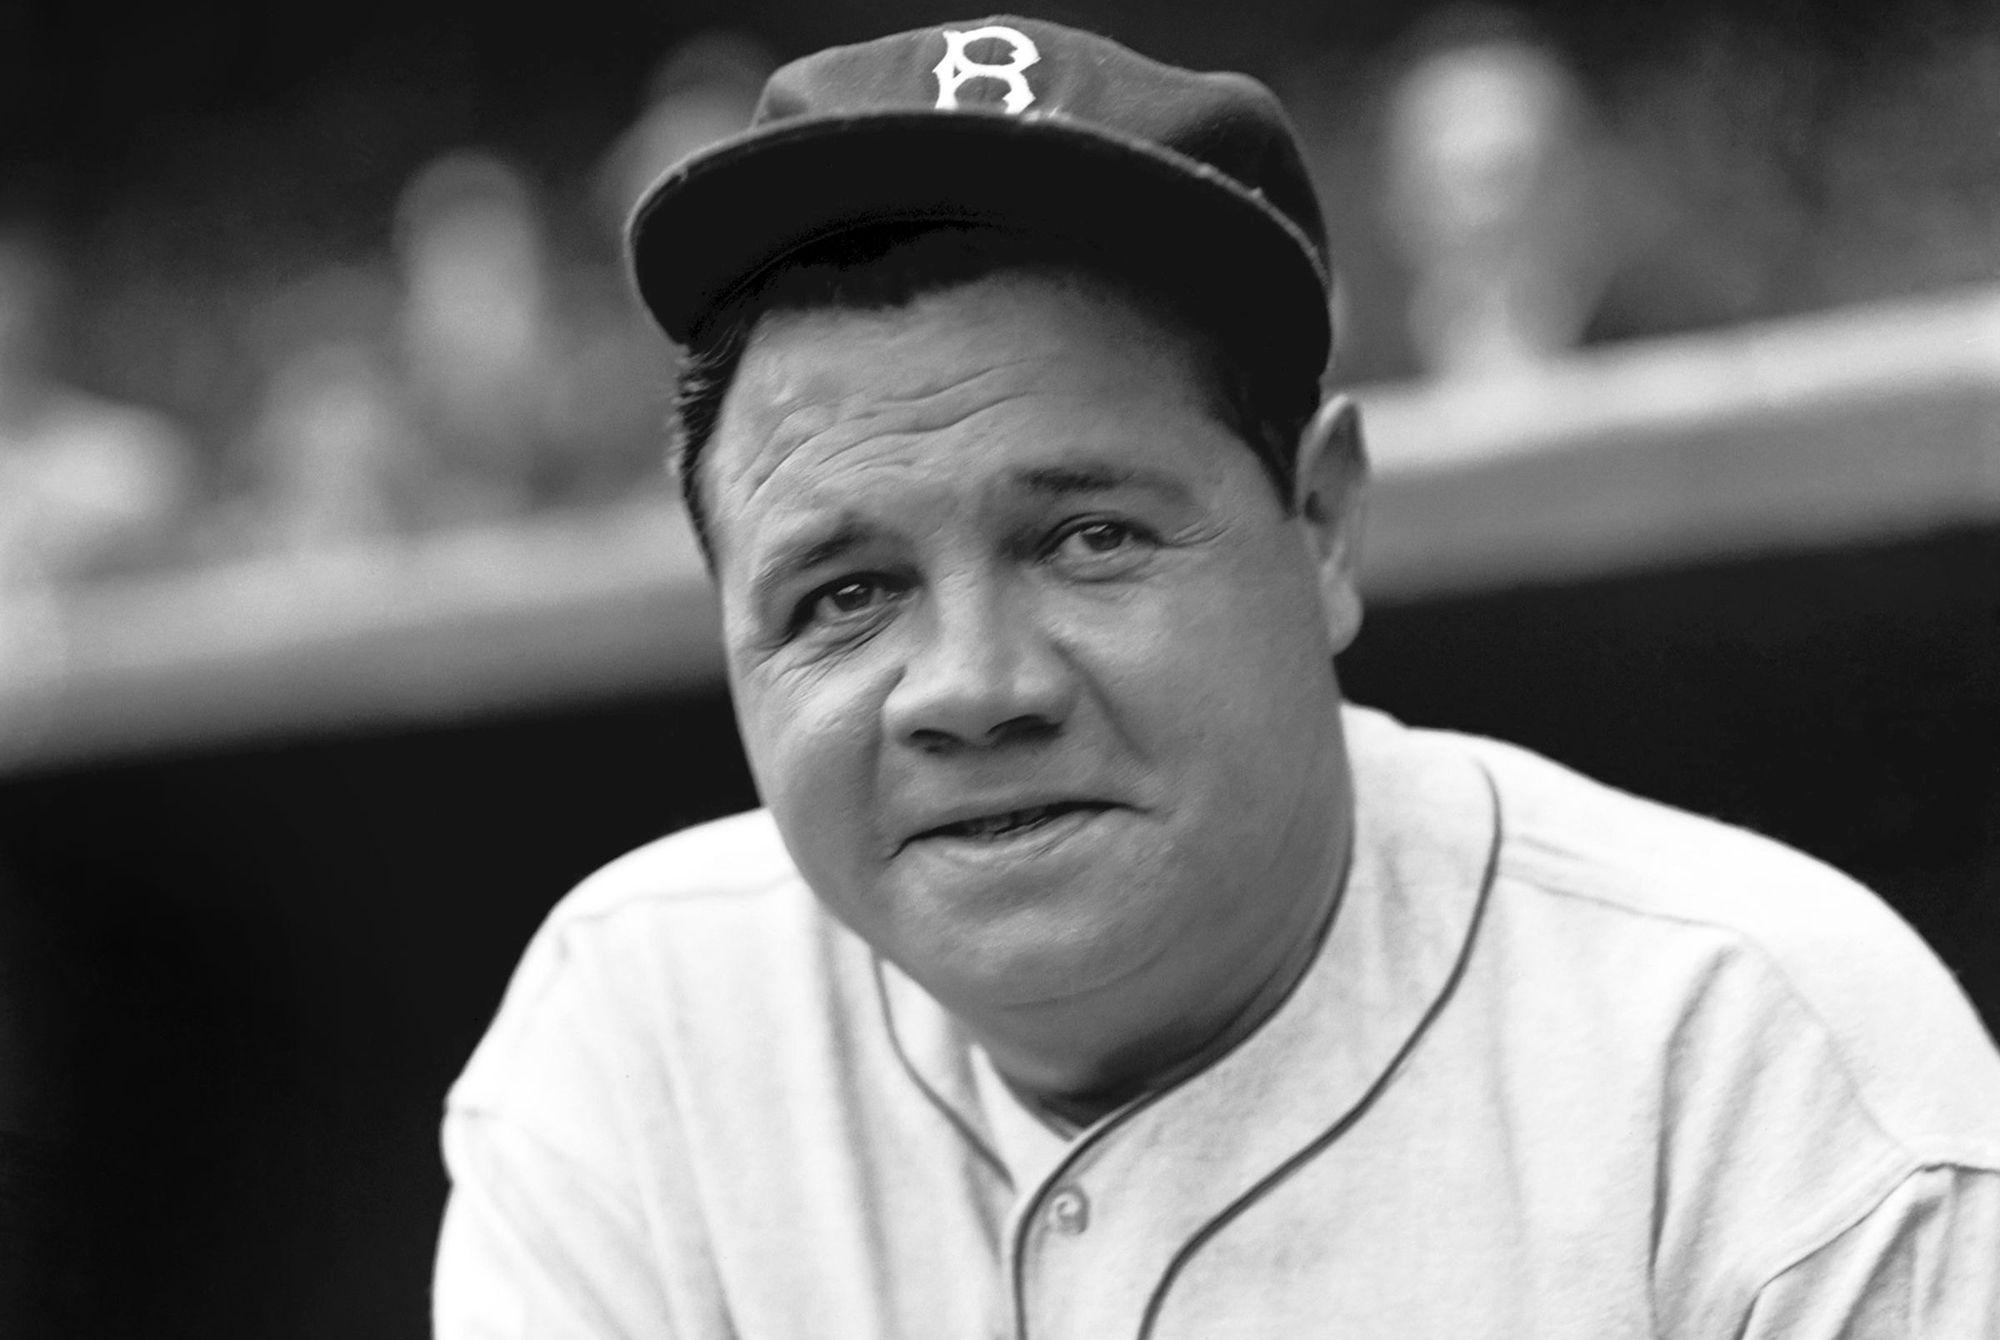 Babe ruth HD wallpapers